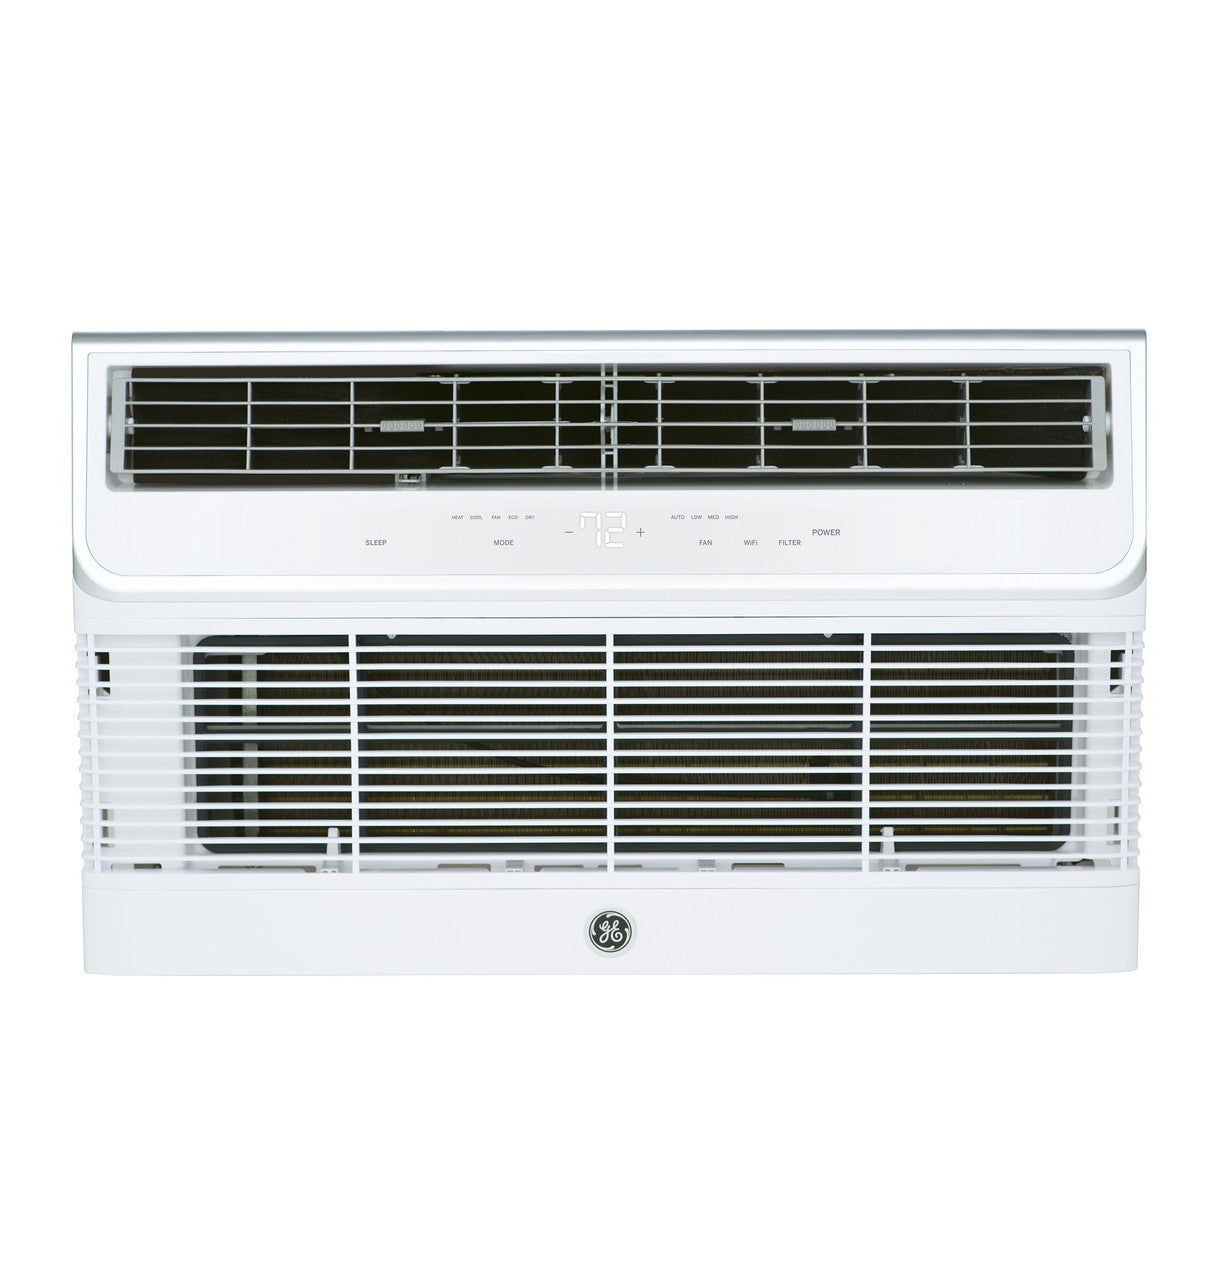 GE 14,000 BTU 208/230 Volt Through-the-Wall Air Conditioner with Electric Heat - AJEQ14DWJ